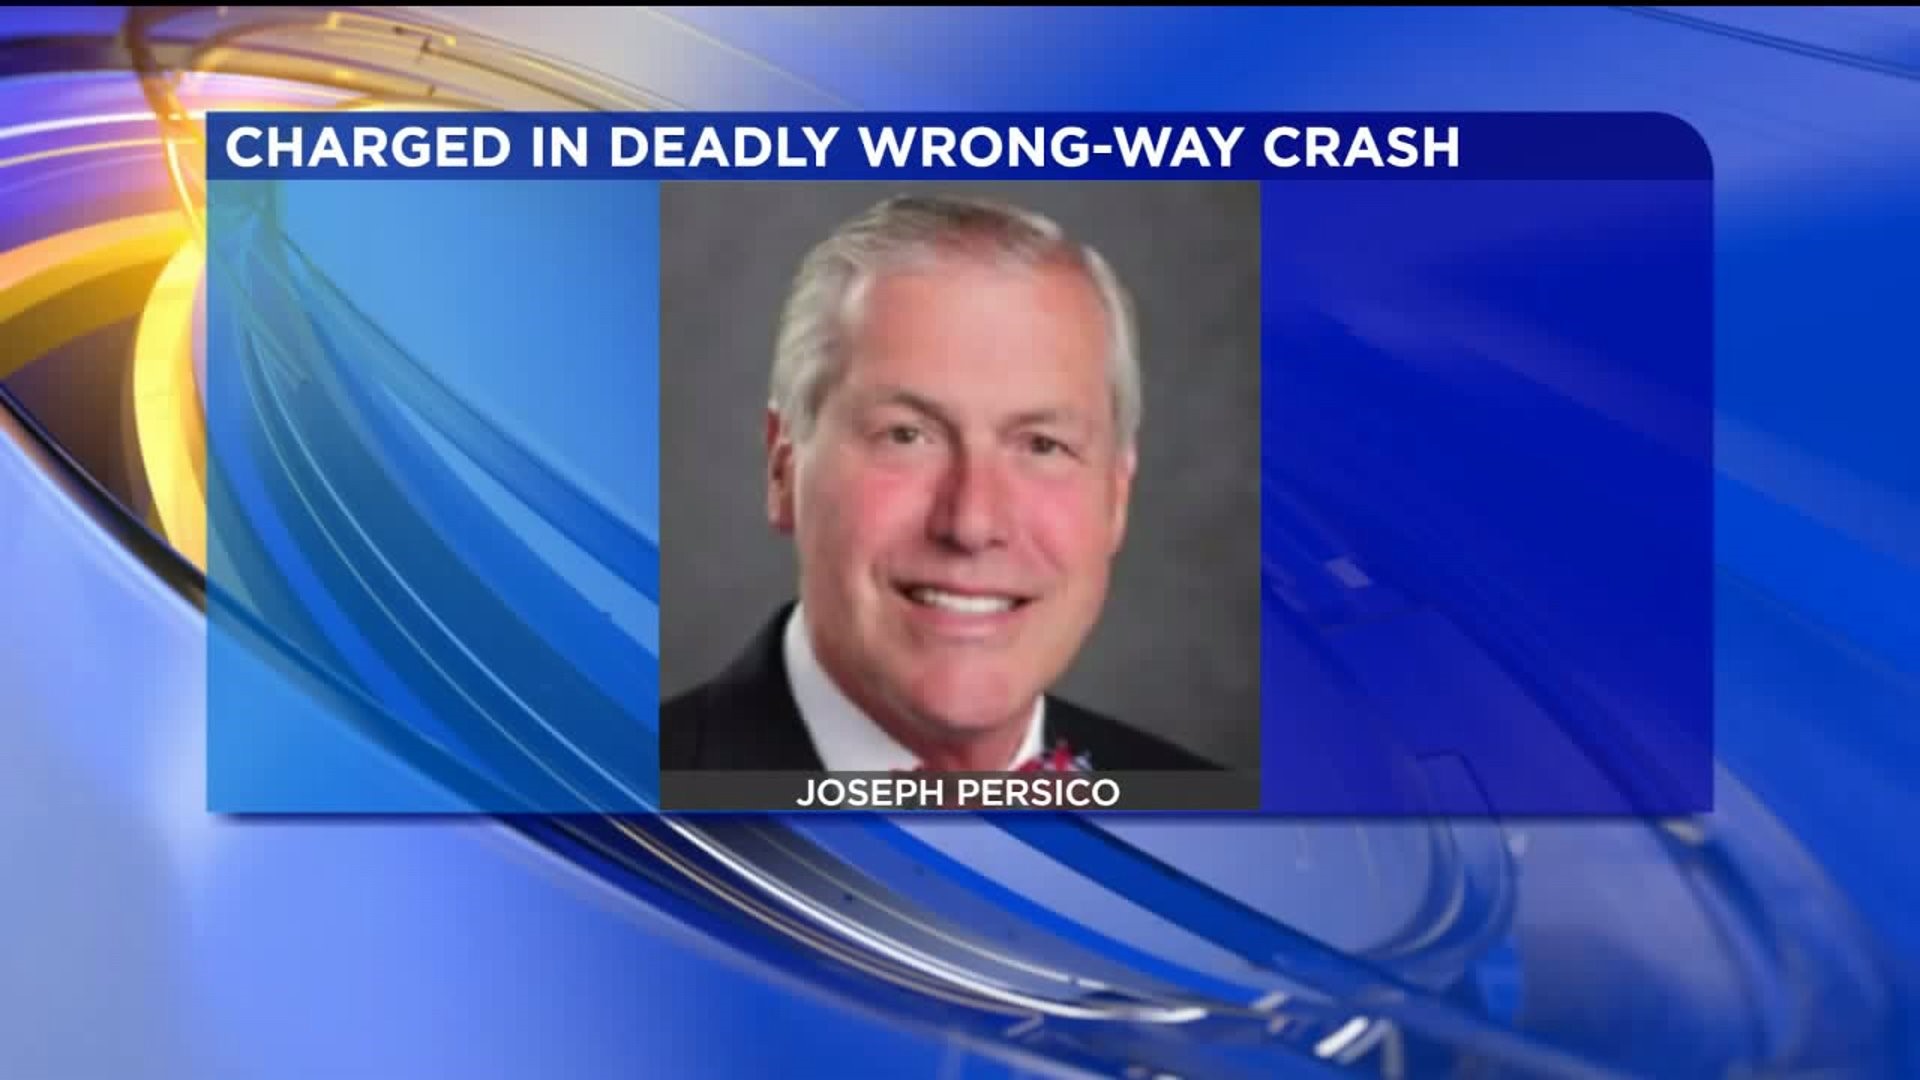 Homicide by Vehicle Charge Filed for Deadly 2018 Wrong-Way Crash on Turnpike